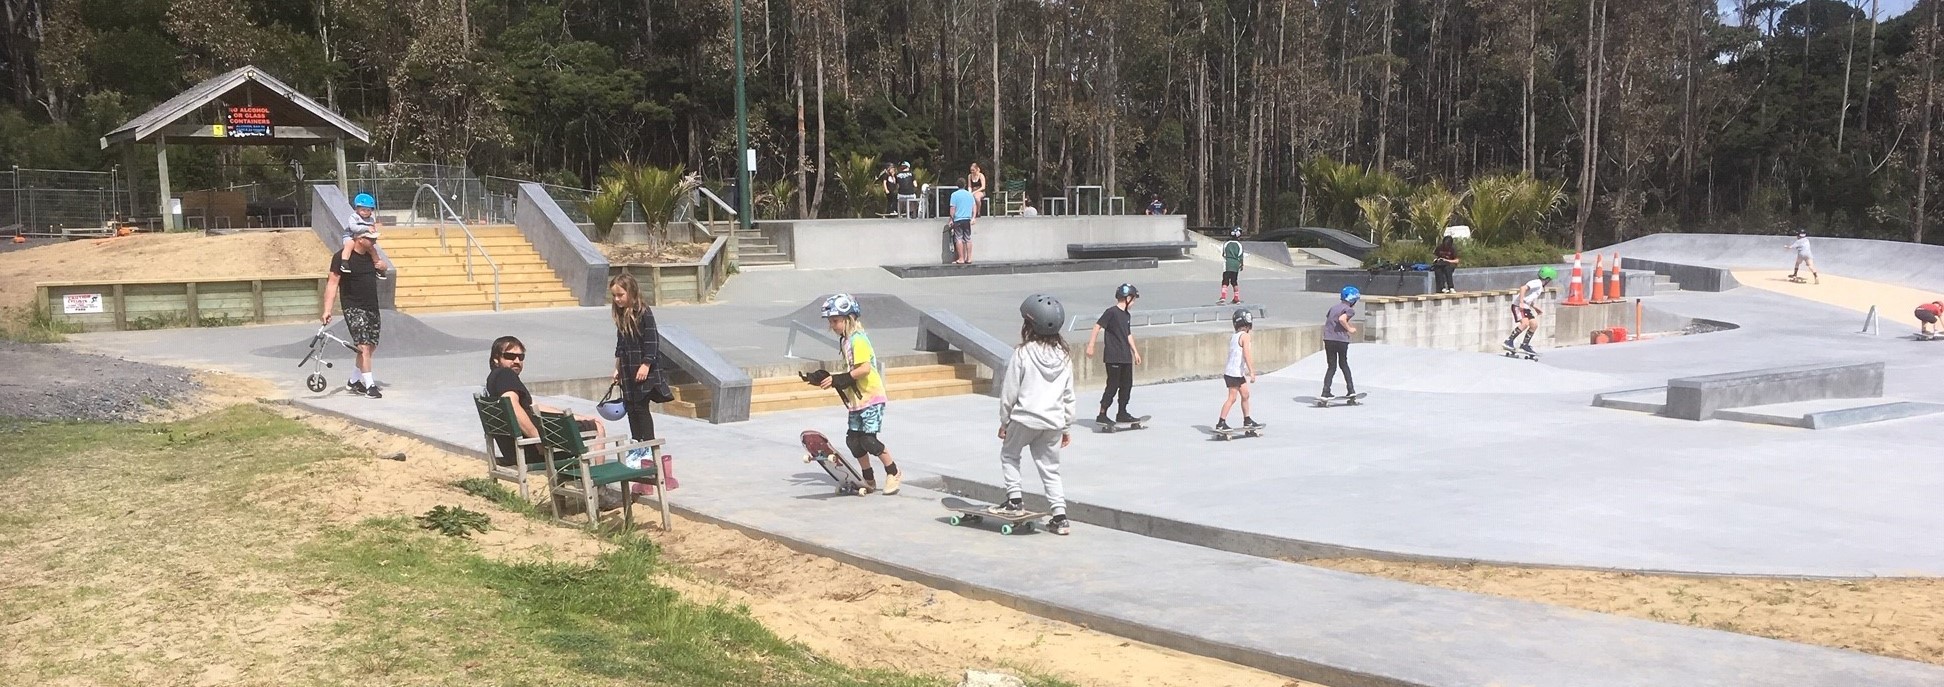 Youngsters enjoying a fine spring day at the new skating area at the Mangawhai Activity Zone. (Photo credit: Colin Gallagher, Mangawhai Activity Zone).